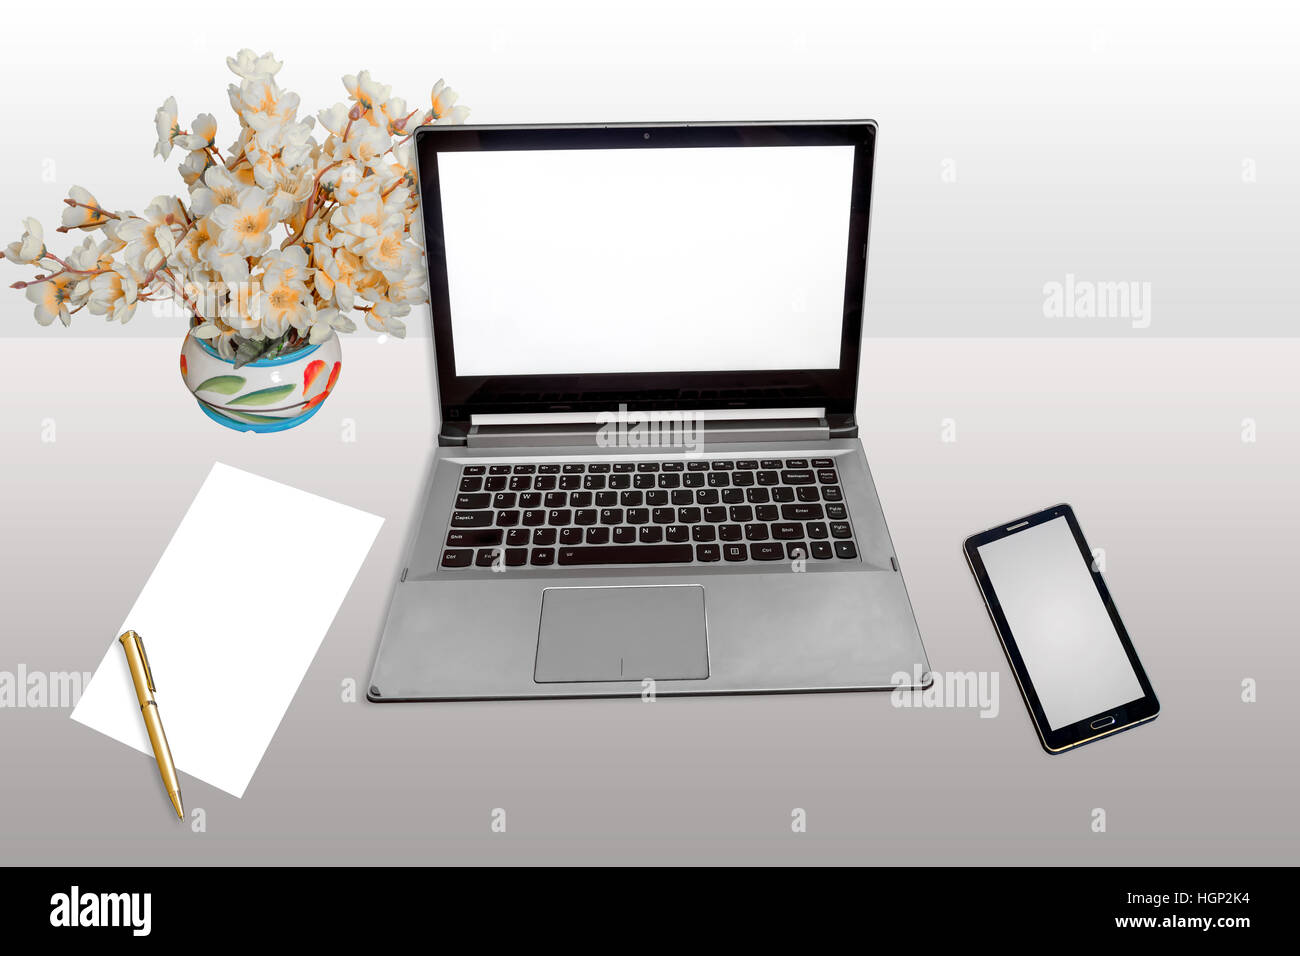 Work place with laptop white screen, smart phone, white blank paper and pen isolated. Stock Photo